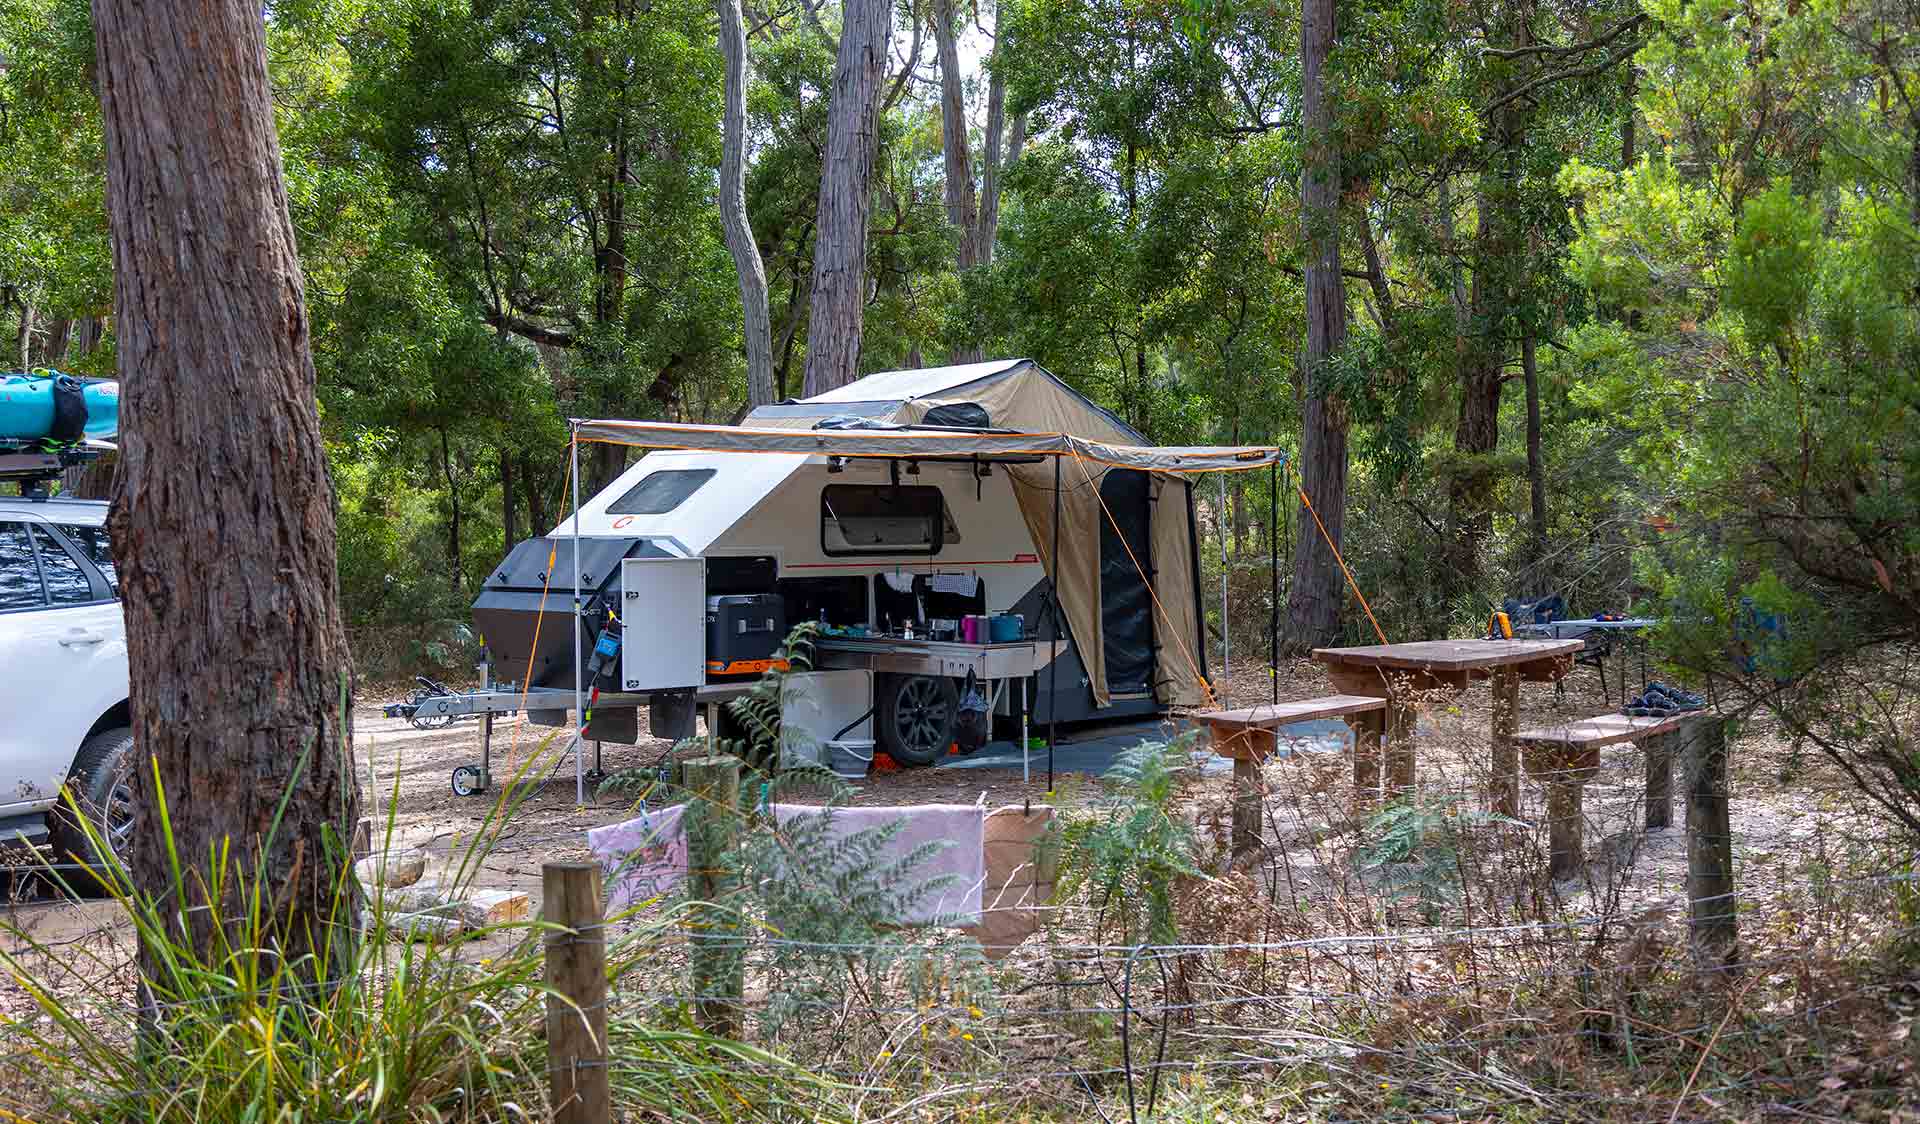 A camper trailer at Wilson Hall Campground at Lower Glenelg National Park